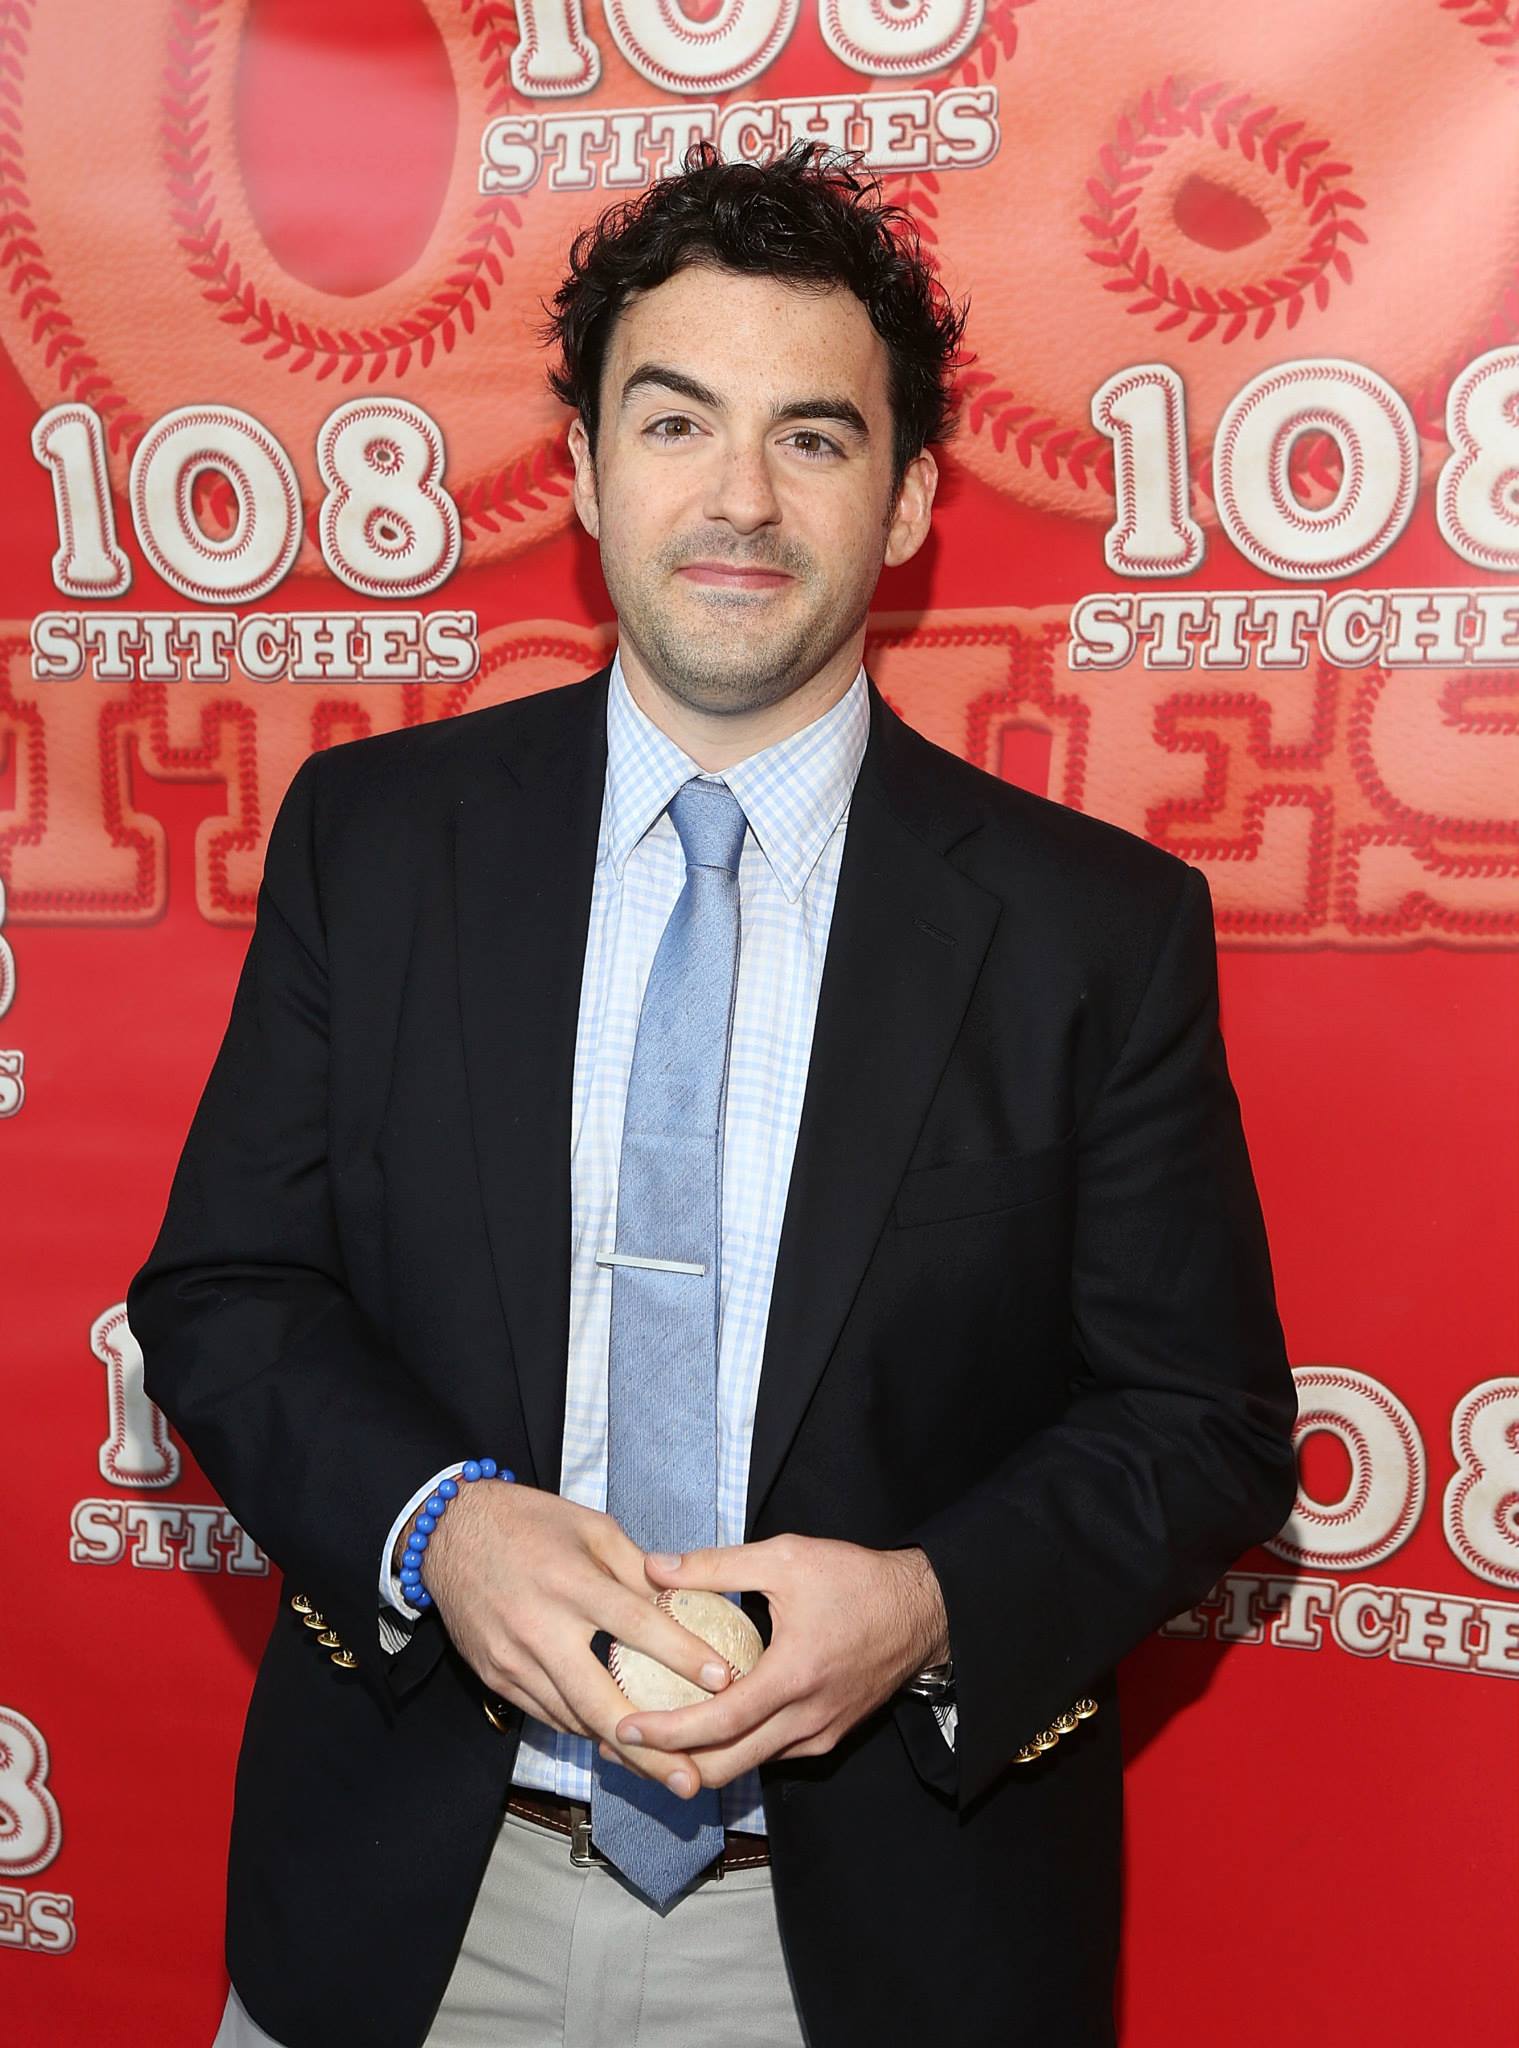 Evan O'Brien at event of 108 Stitches (2014)